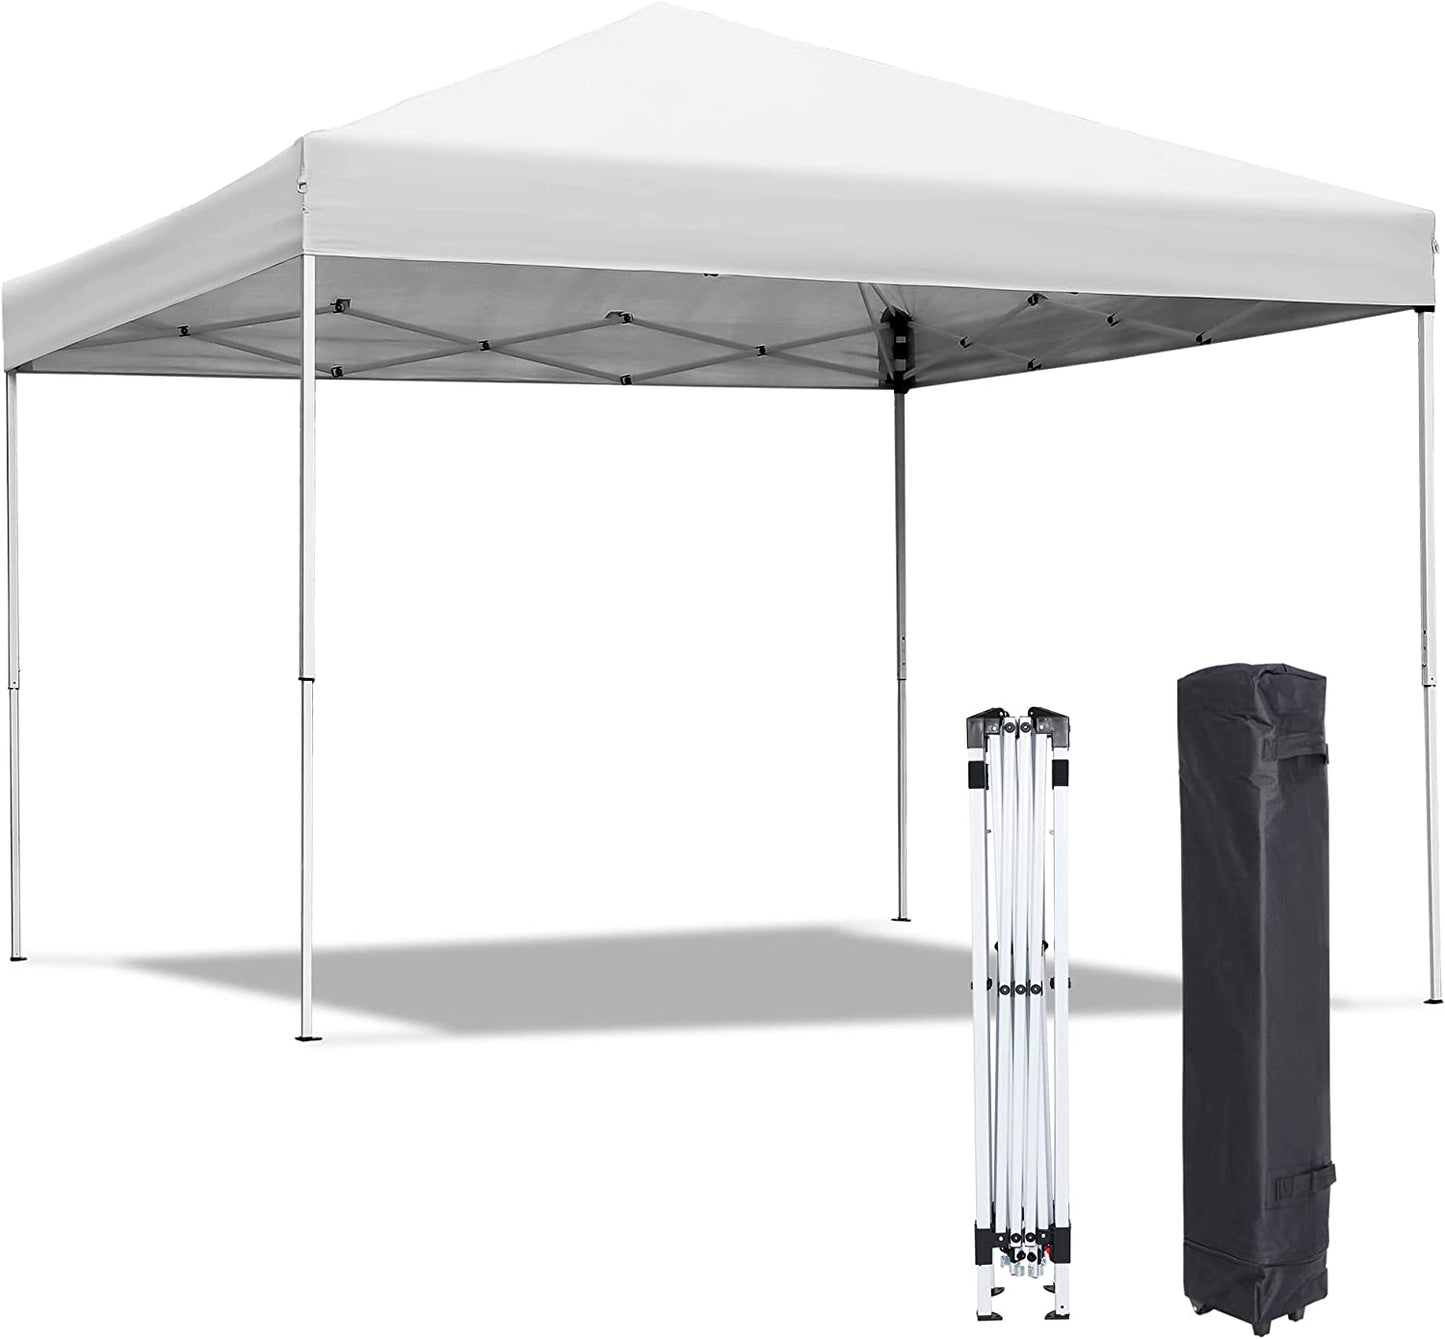 10x10 Pop Up Canopy Tent Easy Set-up Outdoor Patio Canopy Adjustable Straight Leg Heights Instant Shelter with Wheeled Bag, Ropes